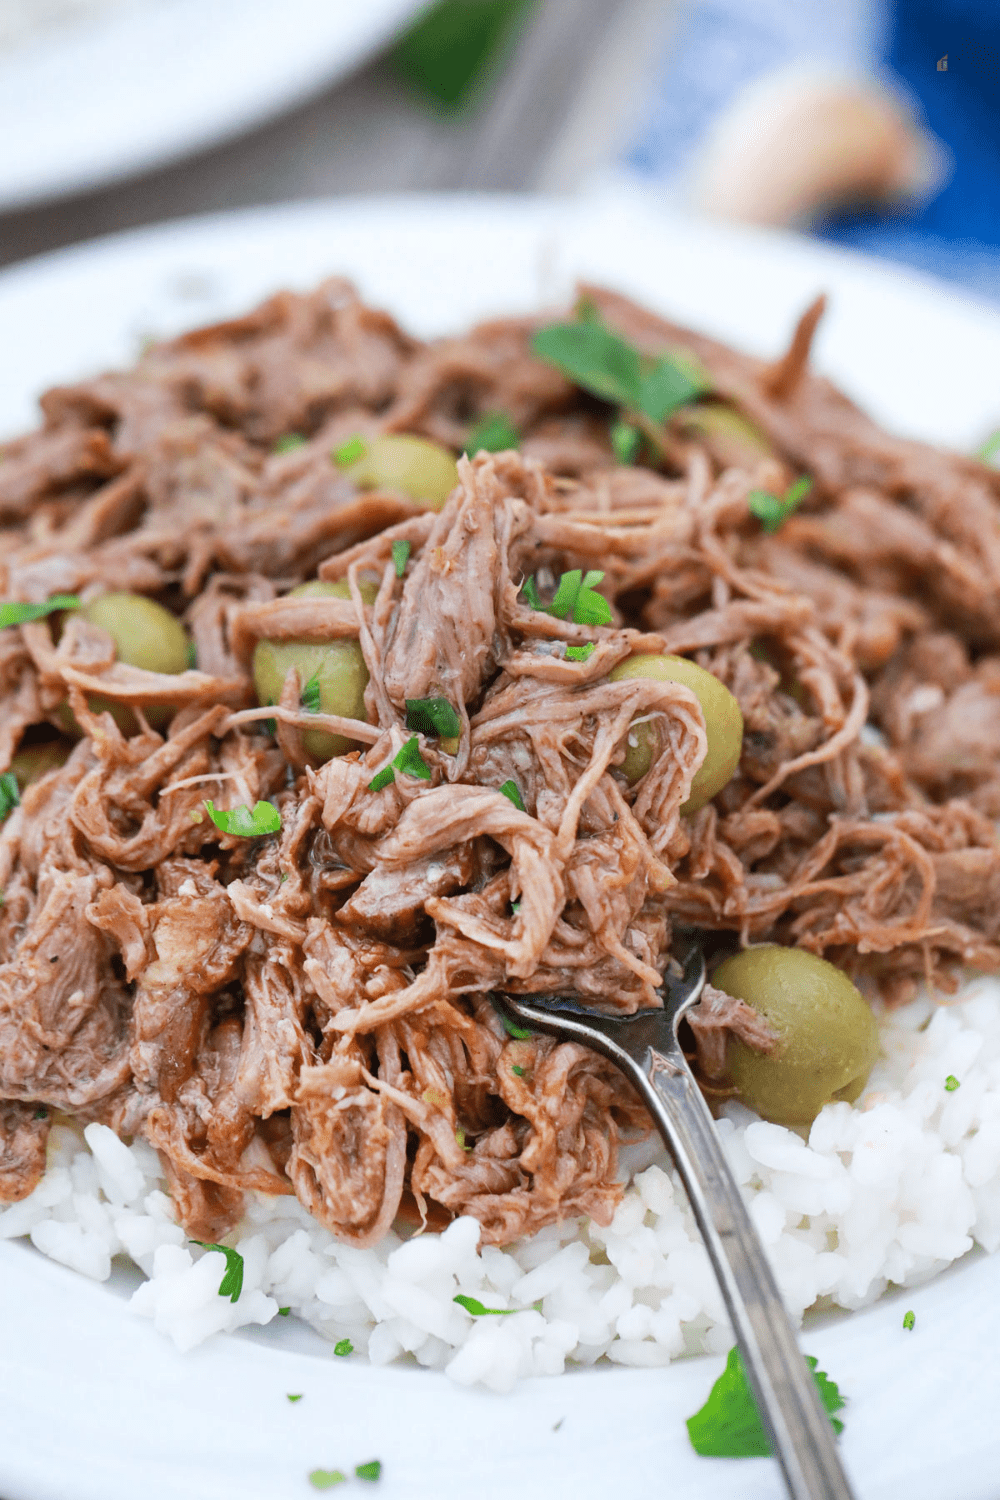 This delicious shredded beef dish is perfect for a winter meal. It's hearty, flavorful, and easy to make in the slow cooker. via @mystayathome